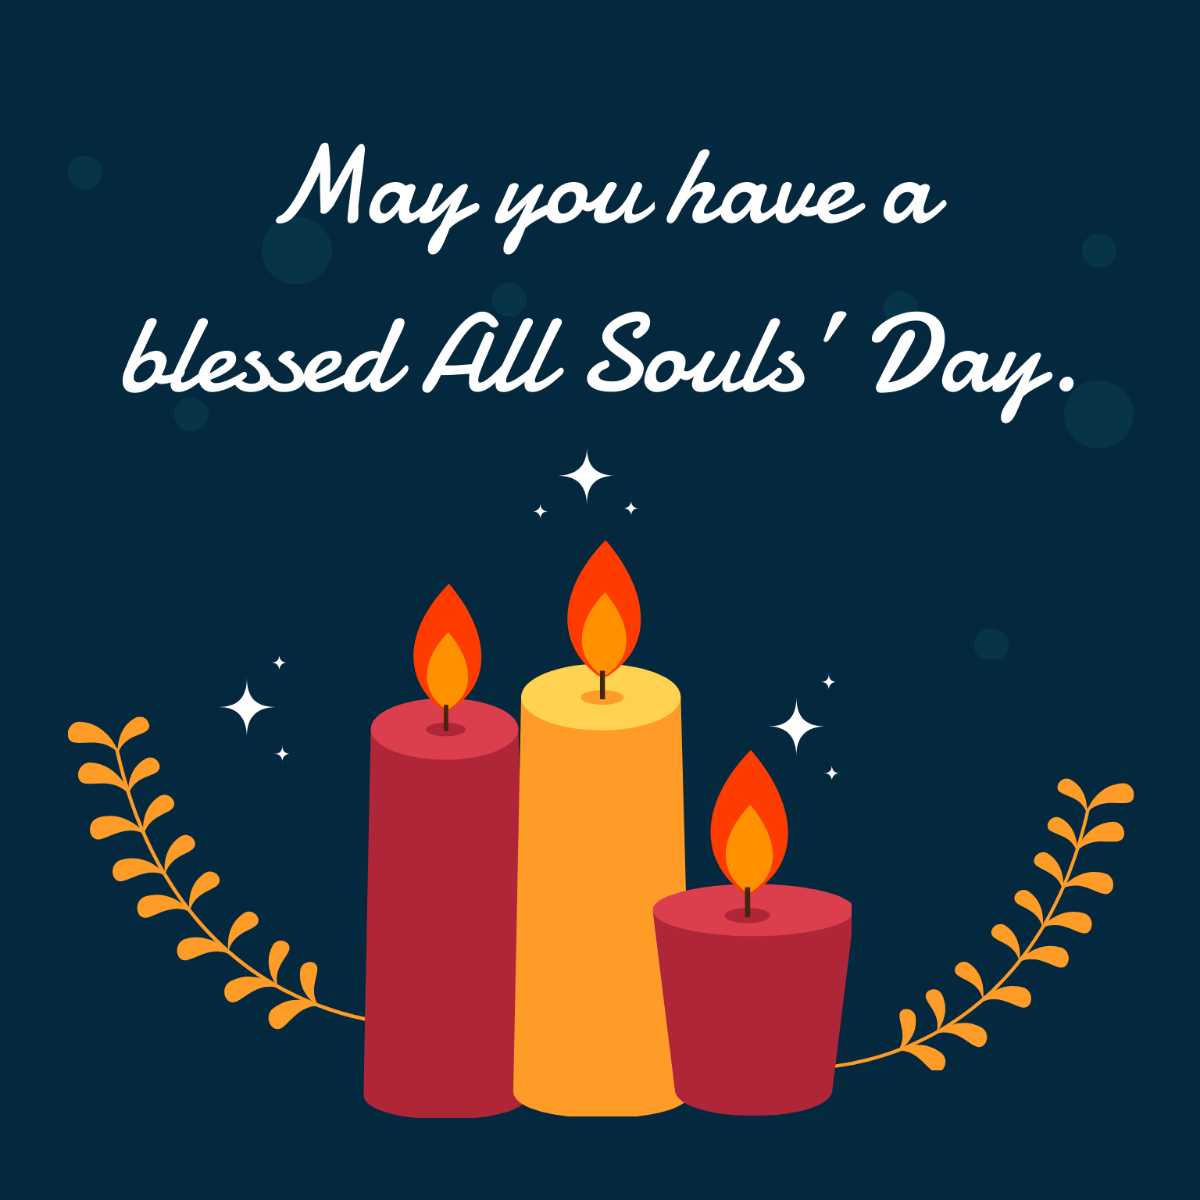 All Souls' Day Wishes Vector